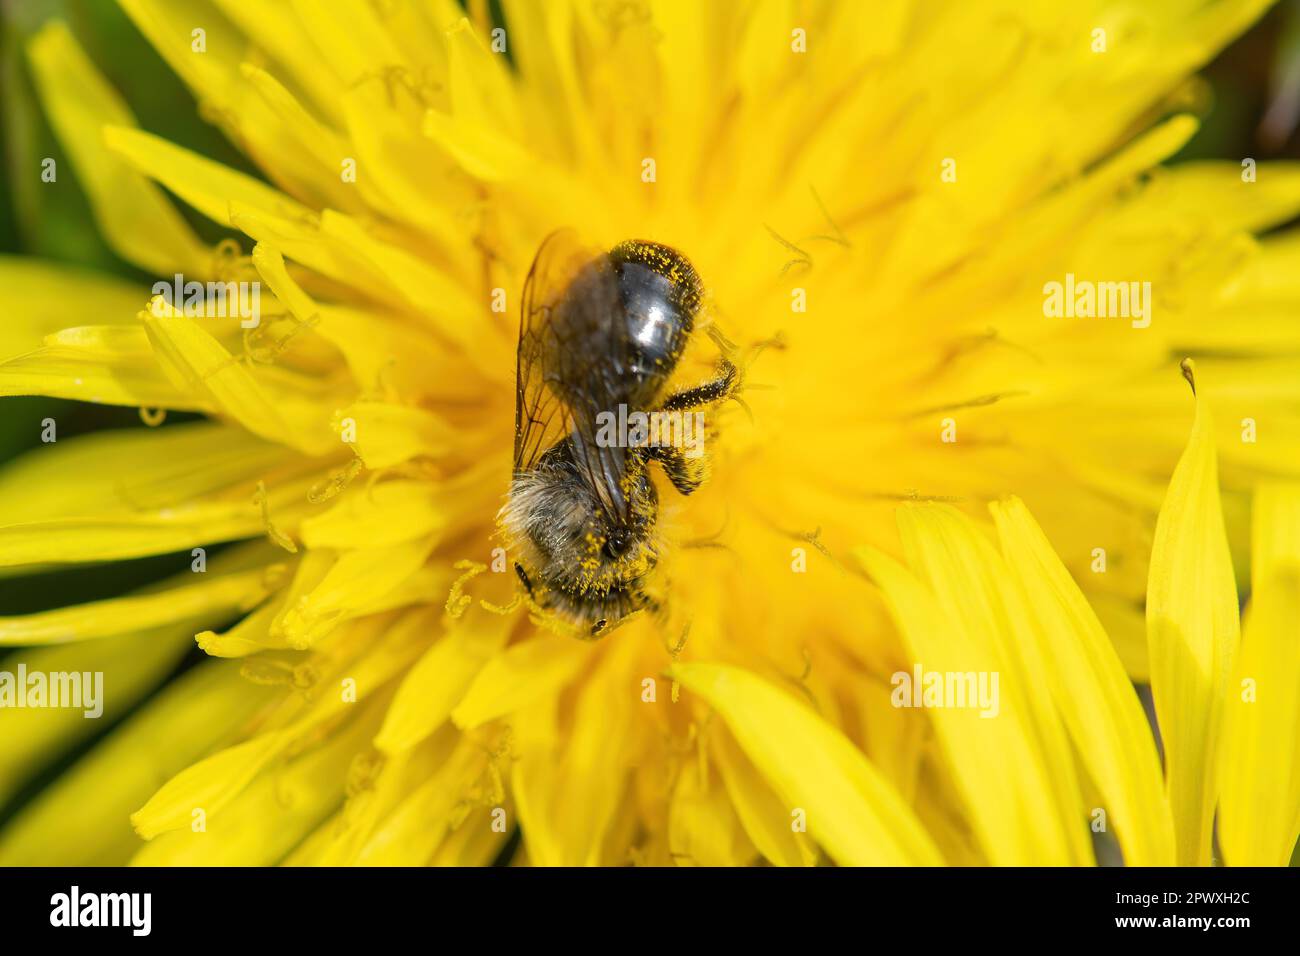 A small bee feeding on nectar on a common dandelion flower Taraxacum officinale, in spring, England, UK Stock Photo